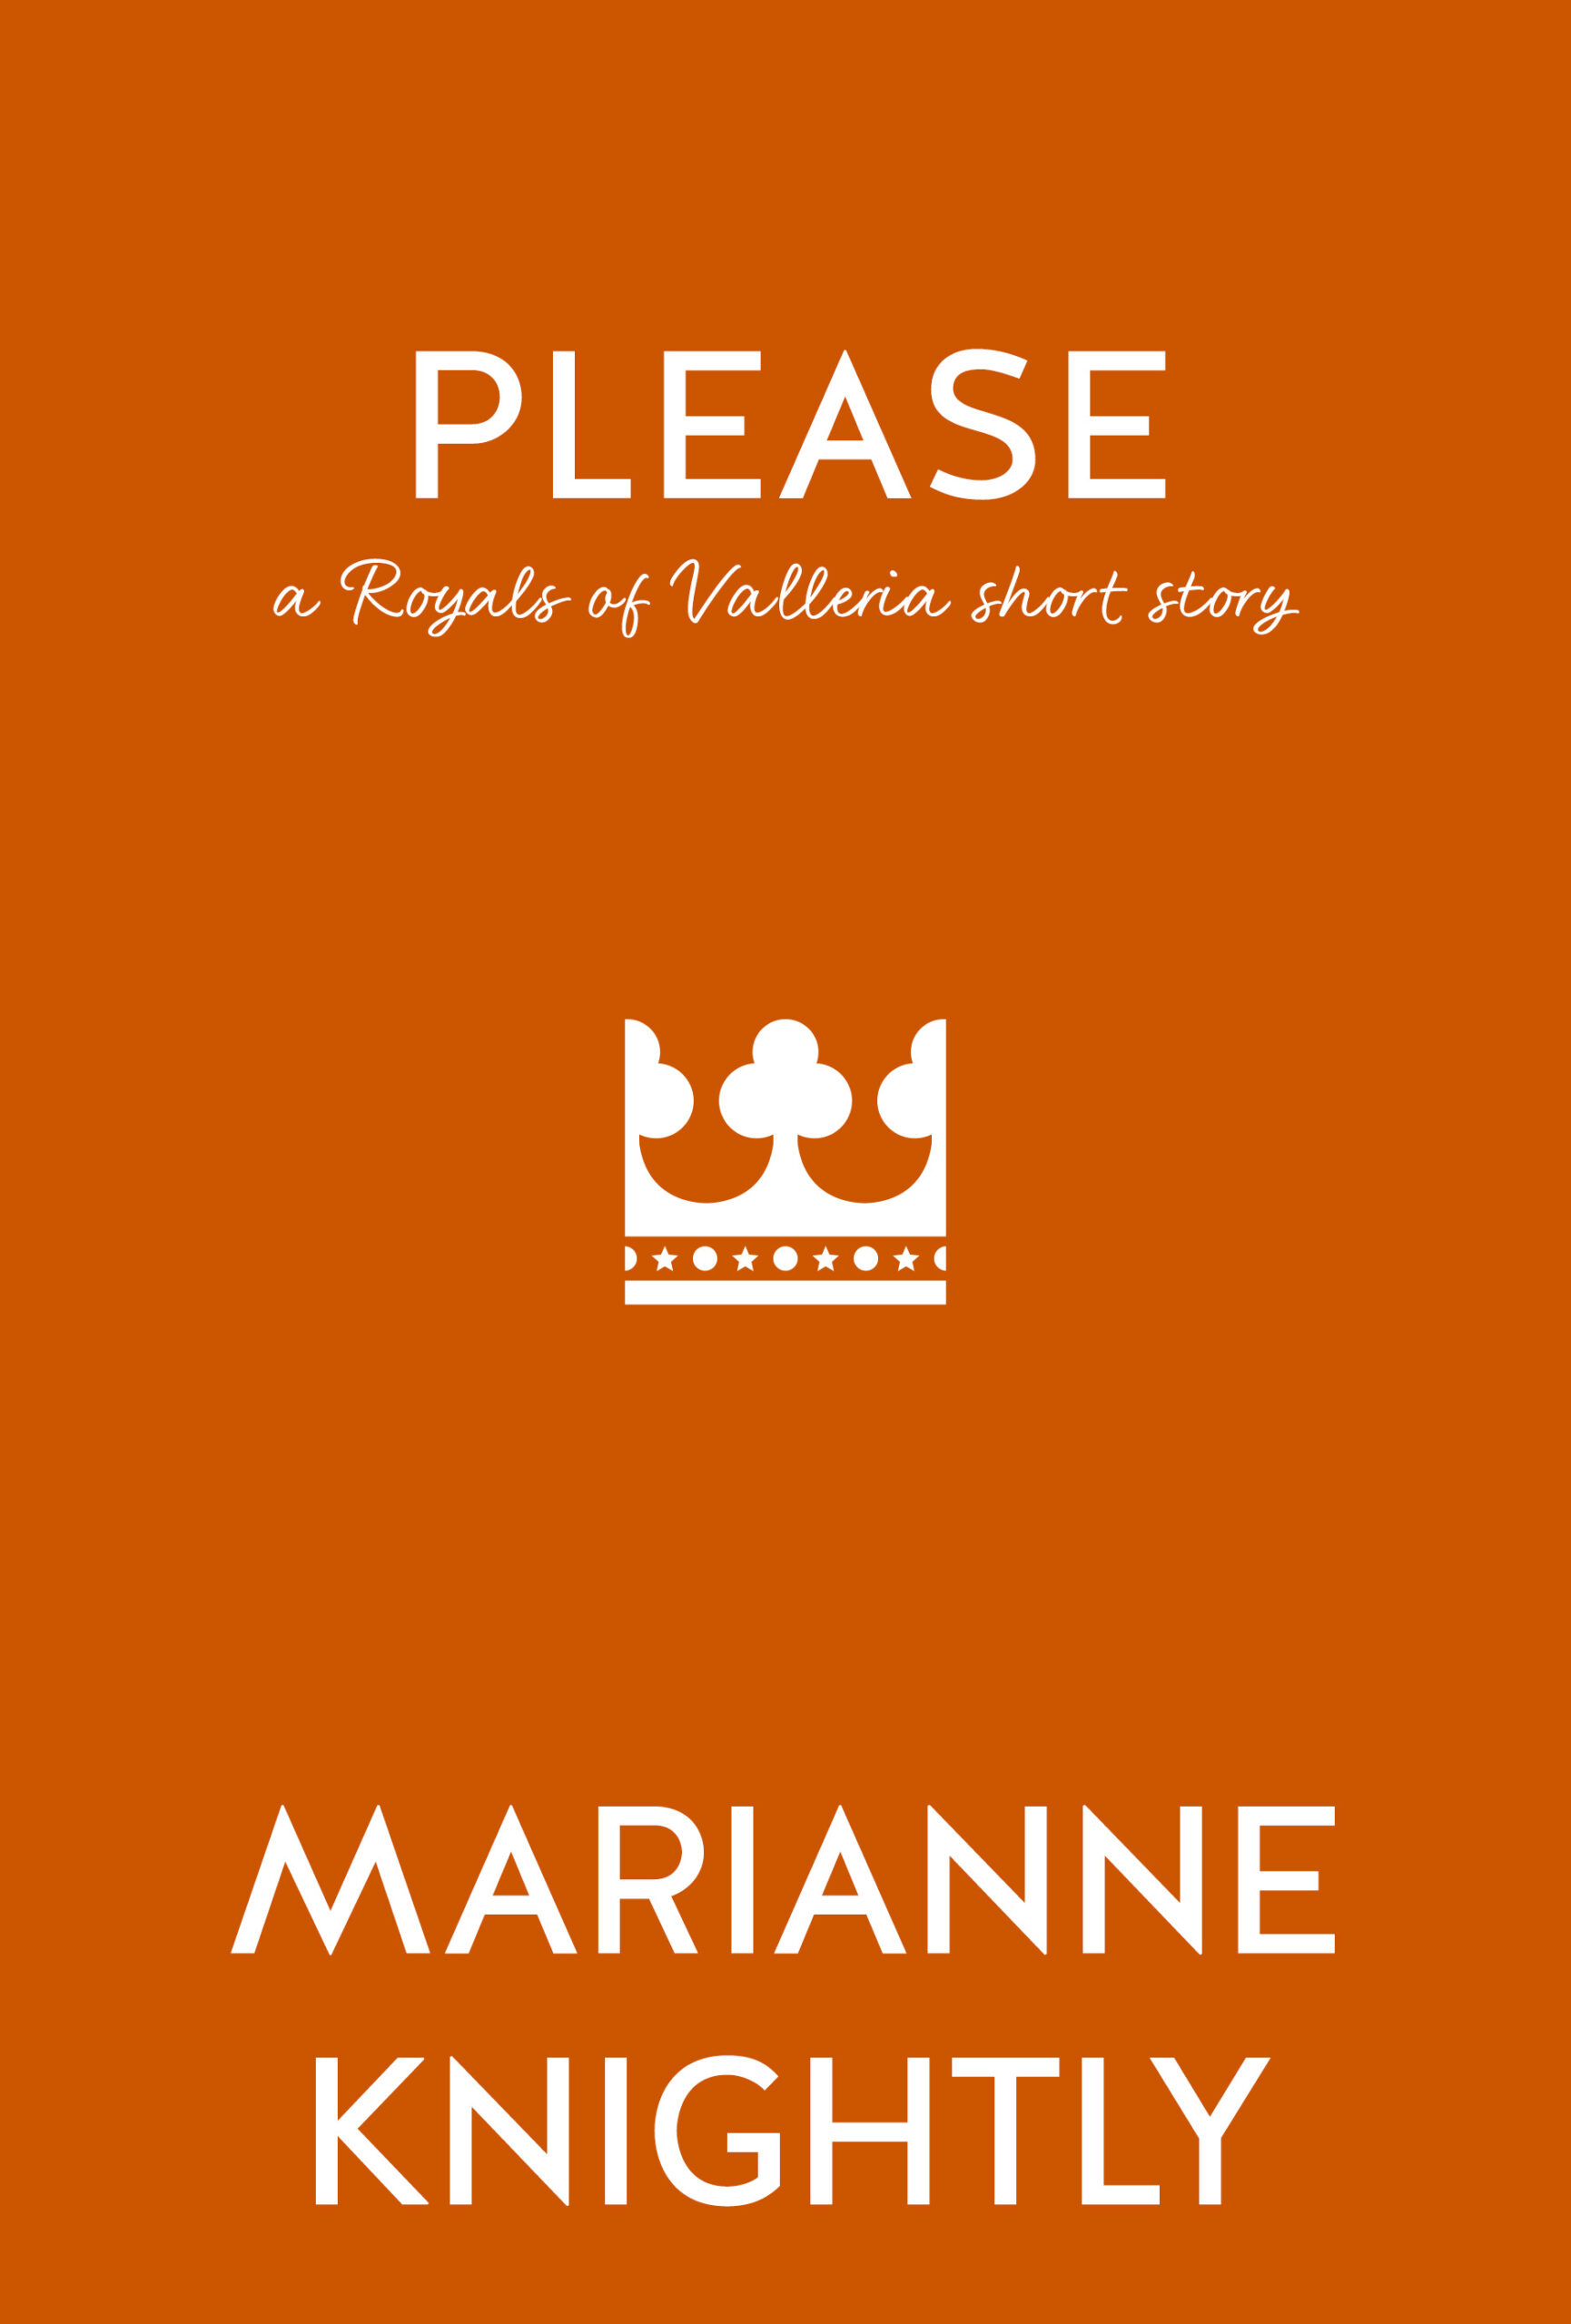 Please - A Royals Short Story by Marianne Knightly